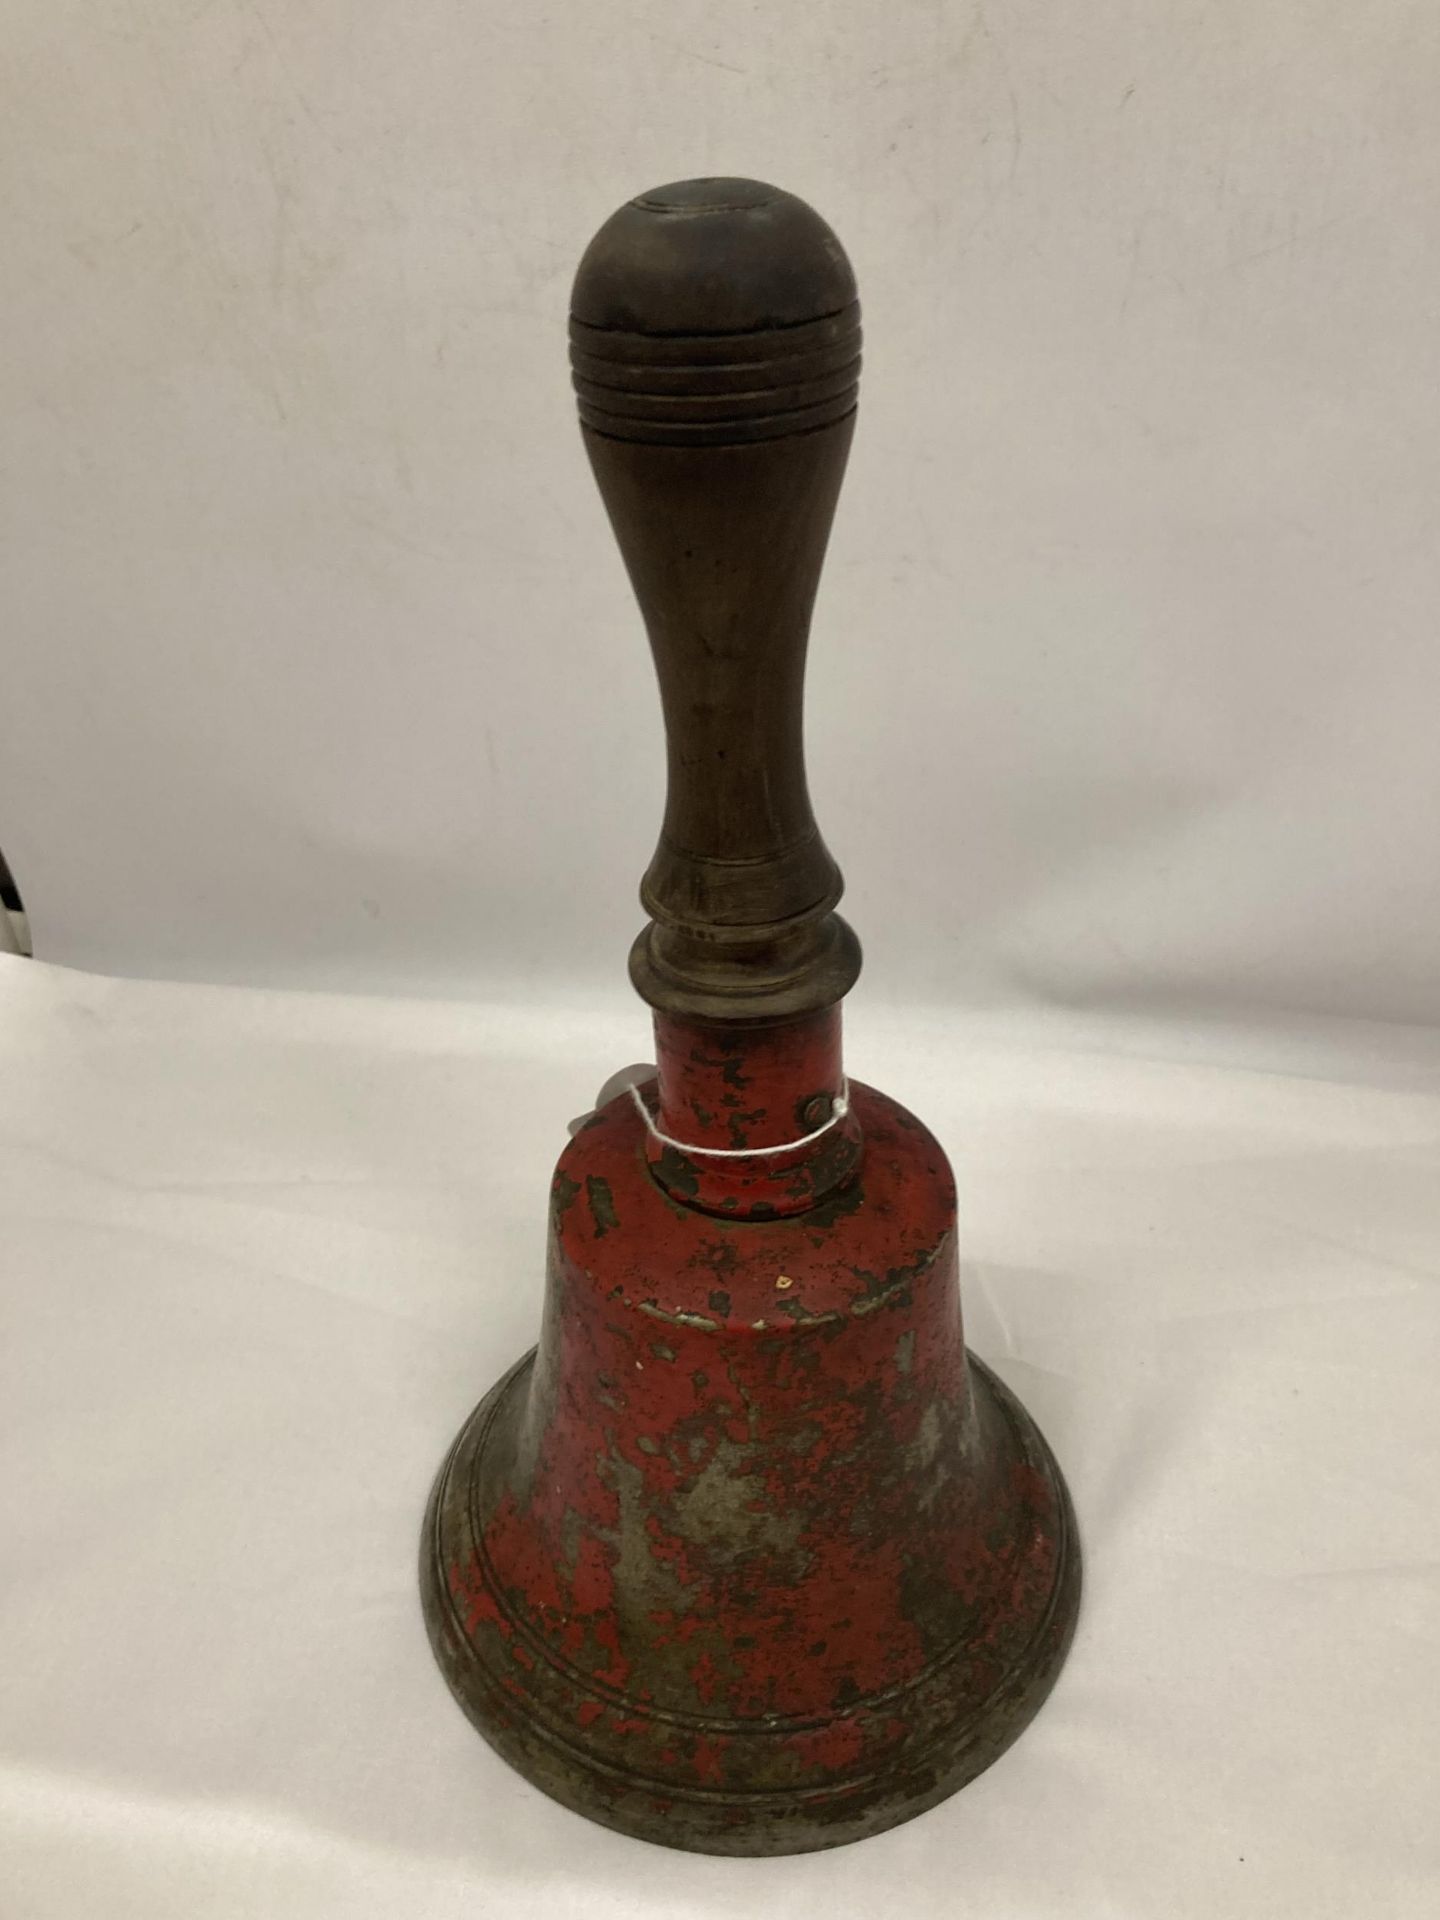 A LARGE VINTAGE METAL BELL WITH A WOODEN HANDLE - Image 2 of 3